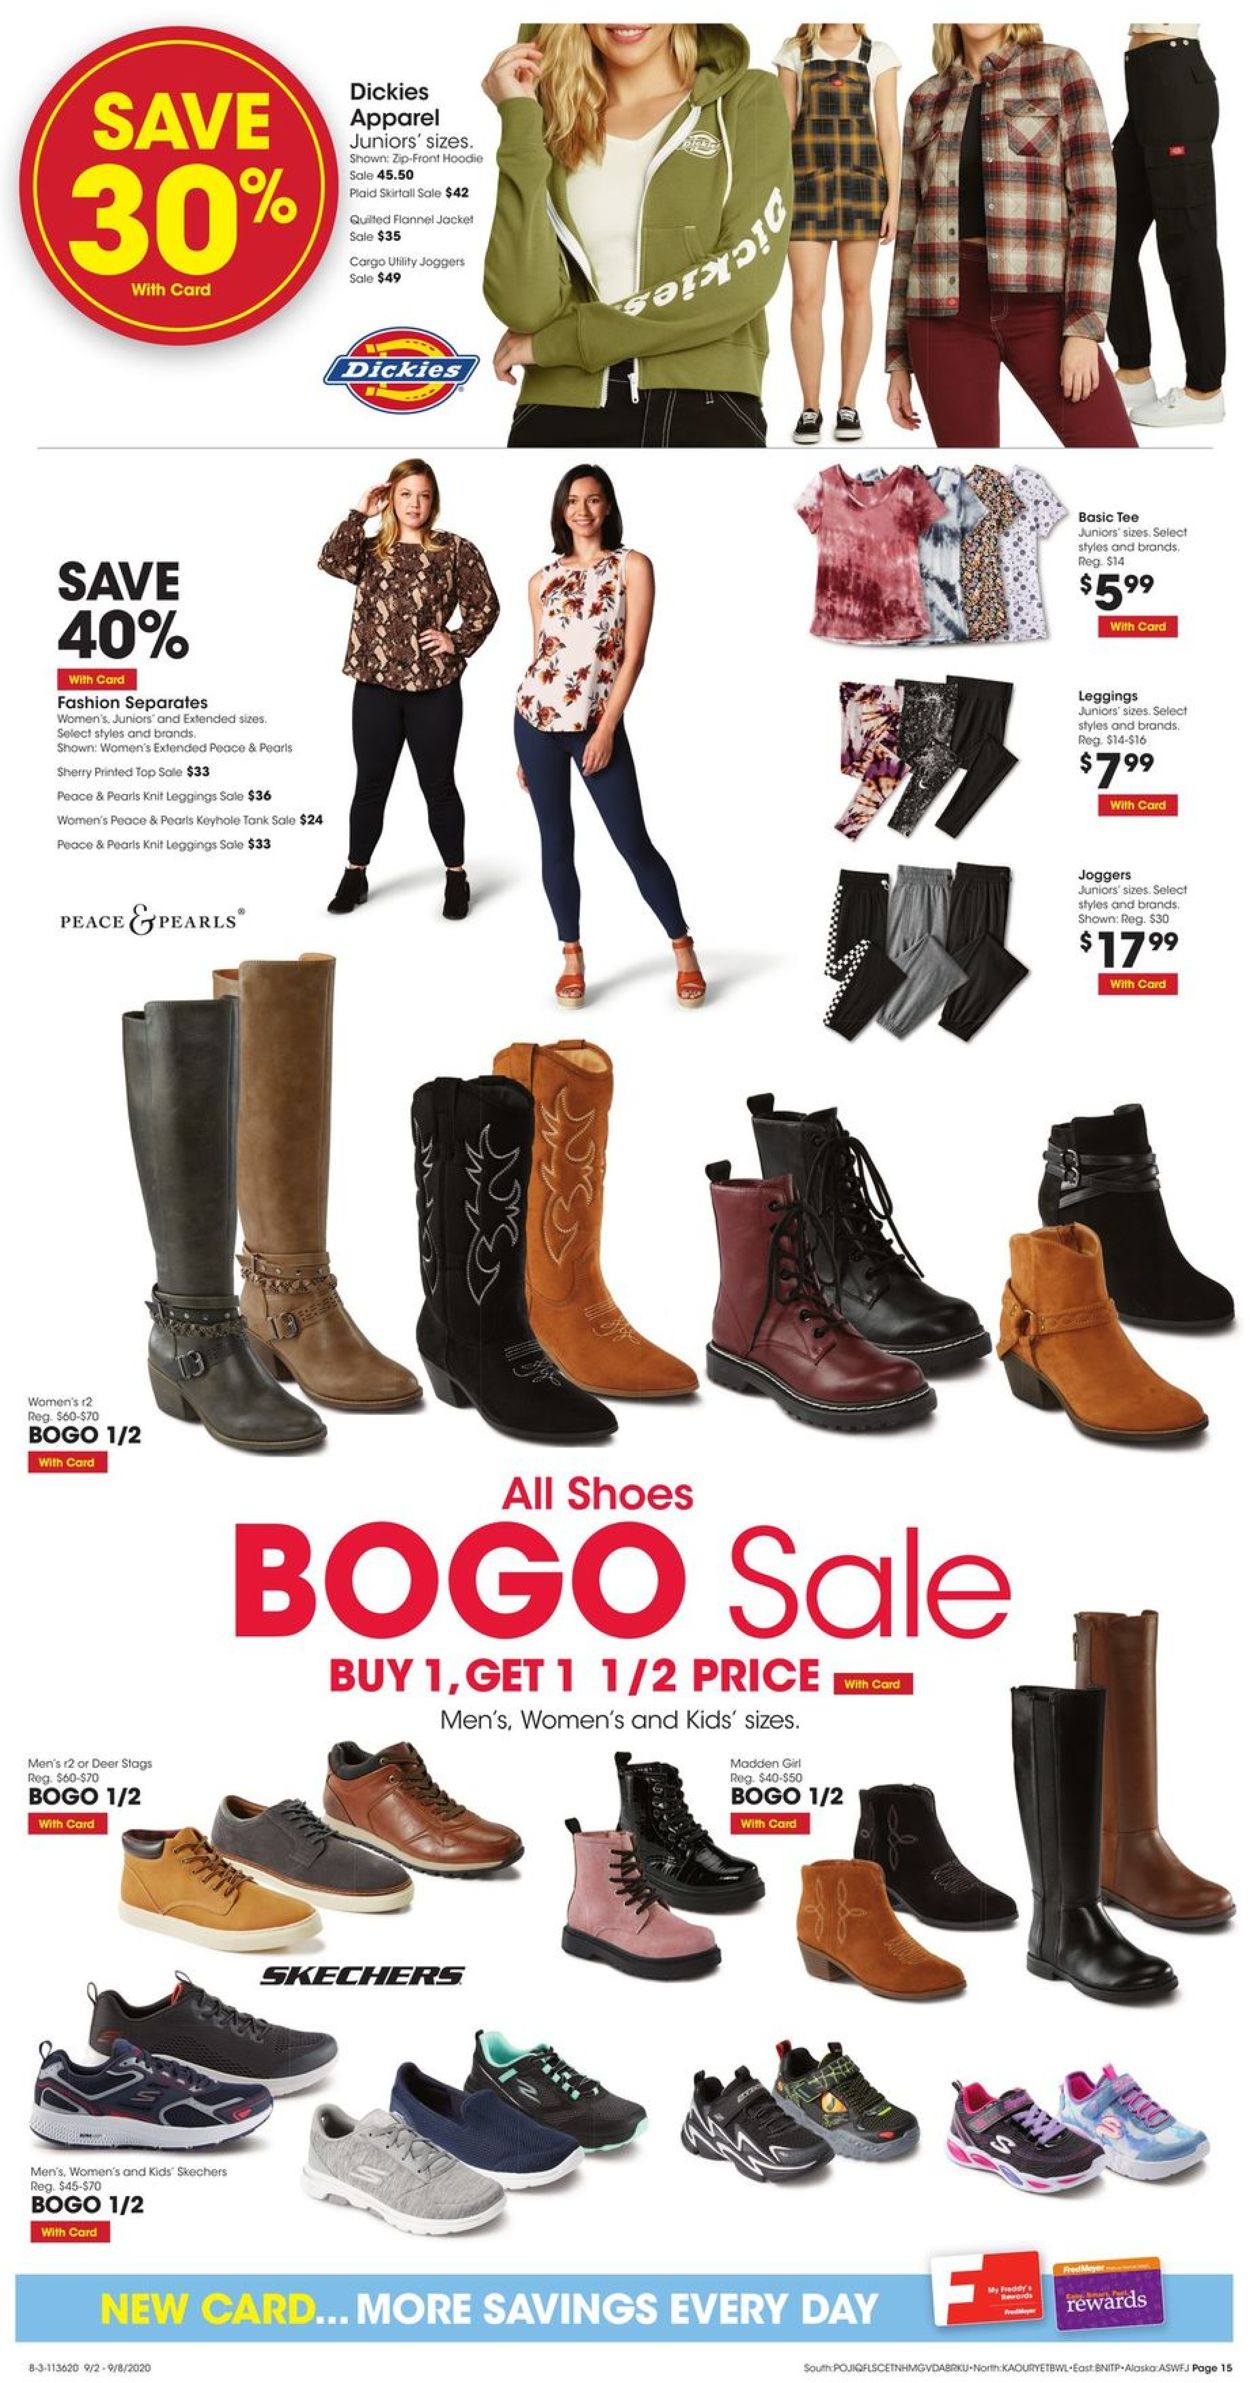 Fred Meyer Current weekly ad 09/02 - 09 